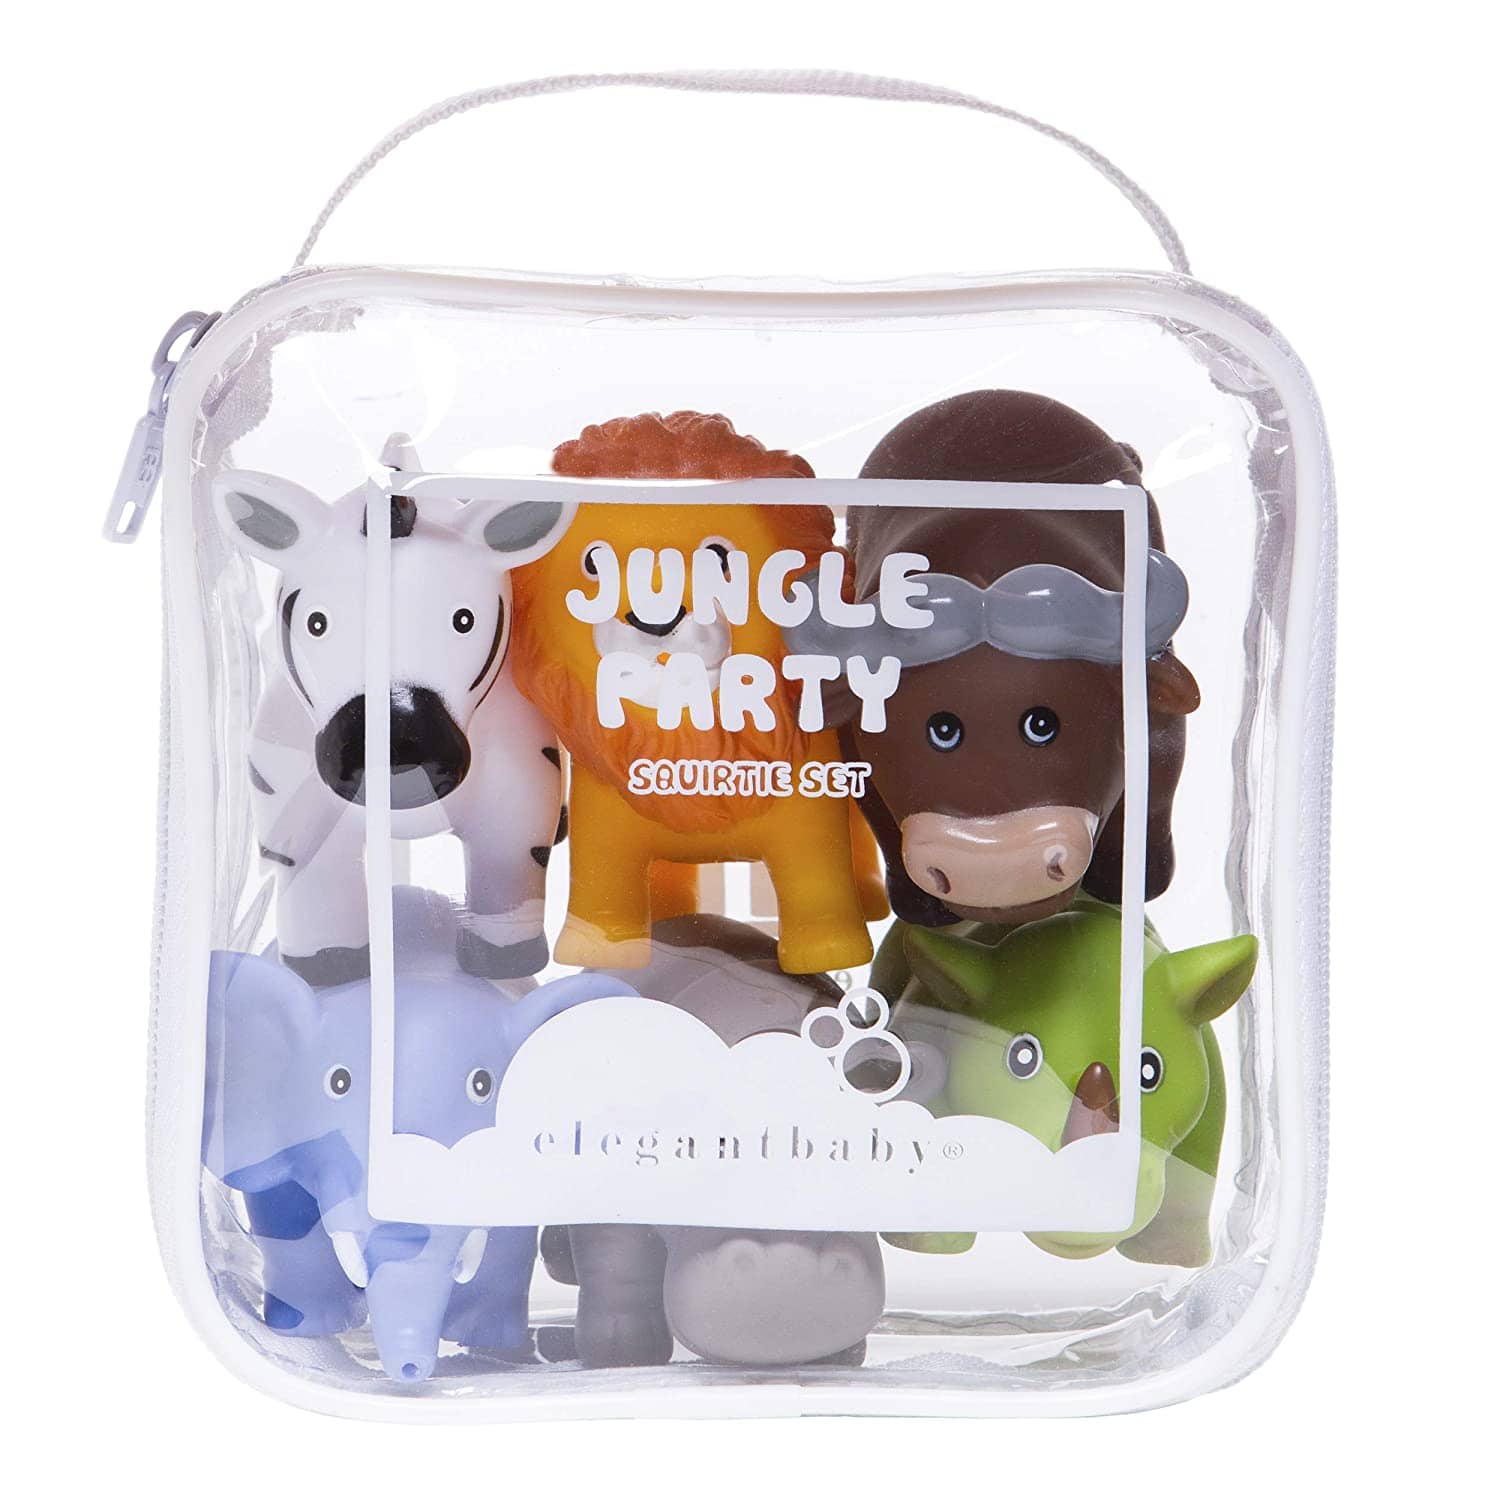 Jungle Party Squirtie Bath Toys